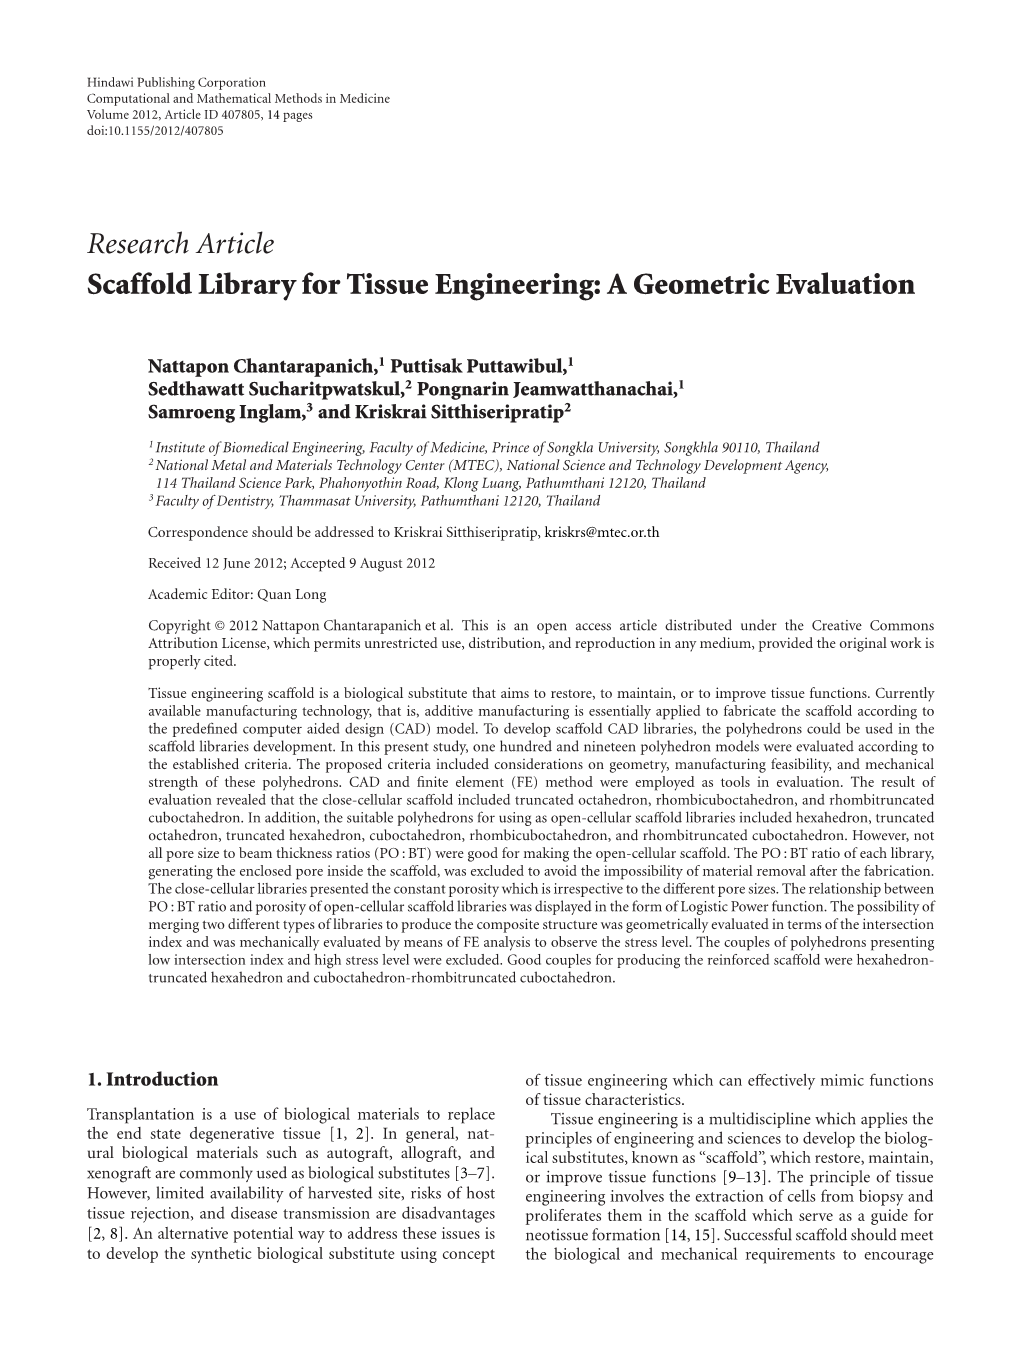 Scaffold Library for Tissue Engineering: a Geometric Evaluation